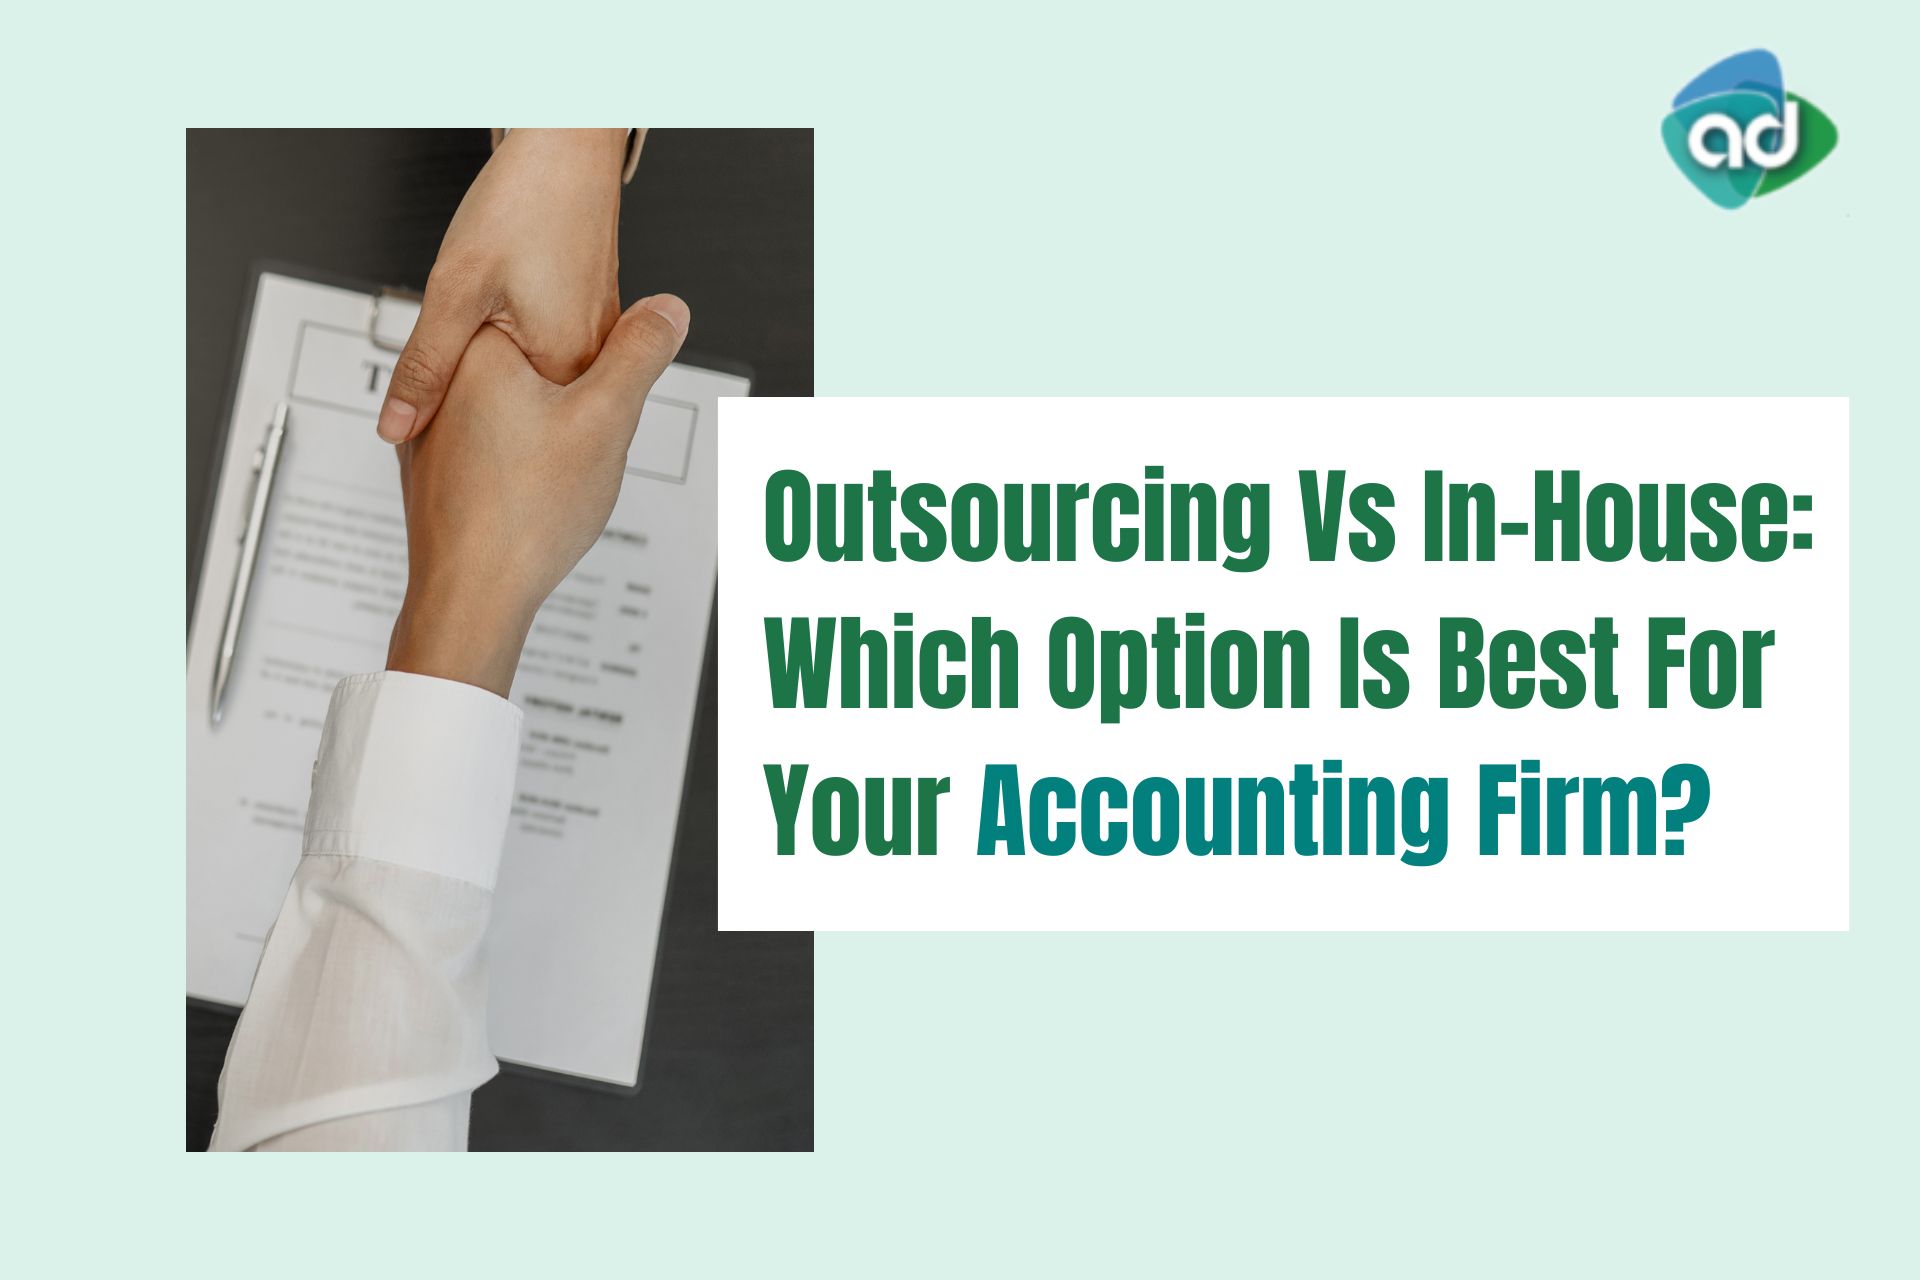 Outsourcing Vs In-House: Which Option Is Best For Your Accounting Firm?